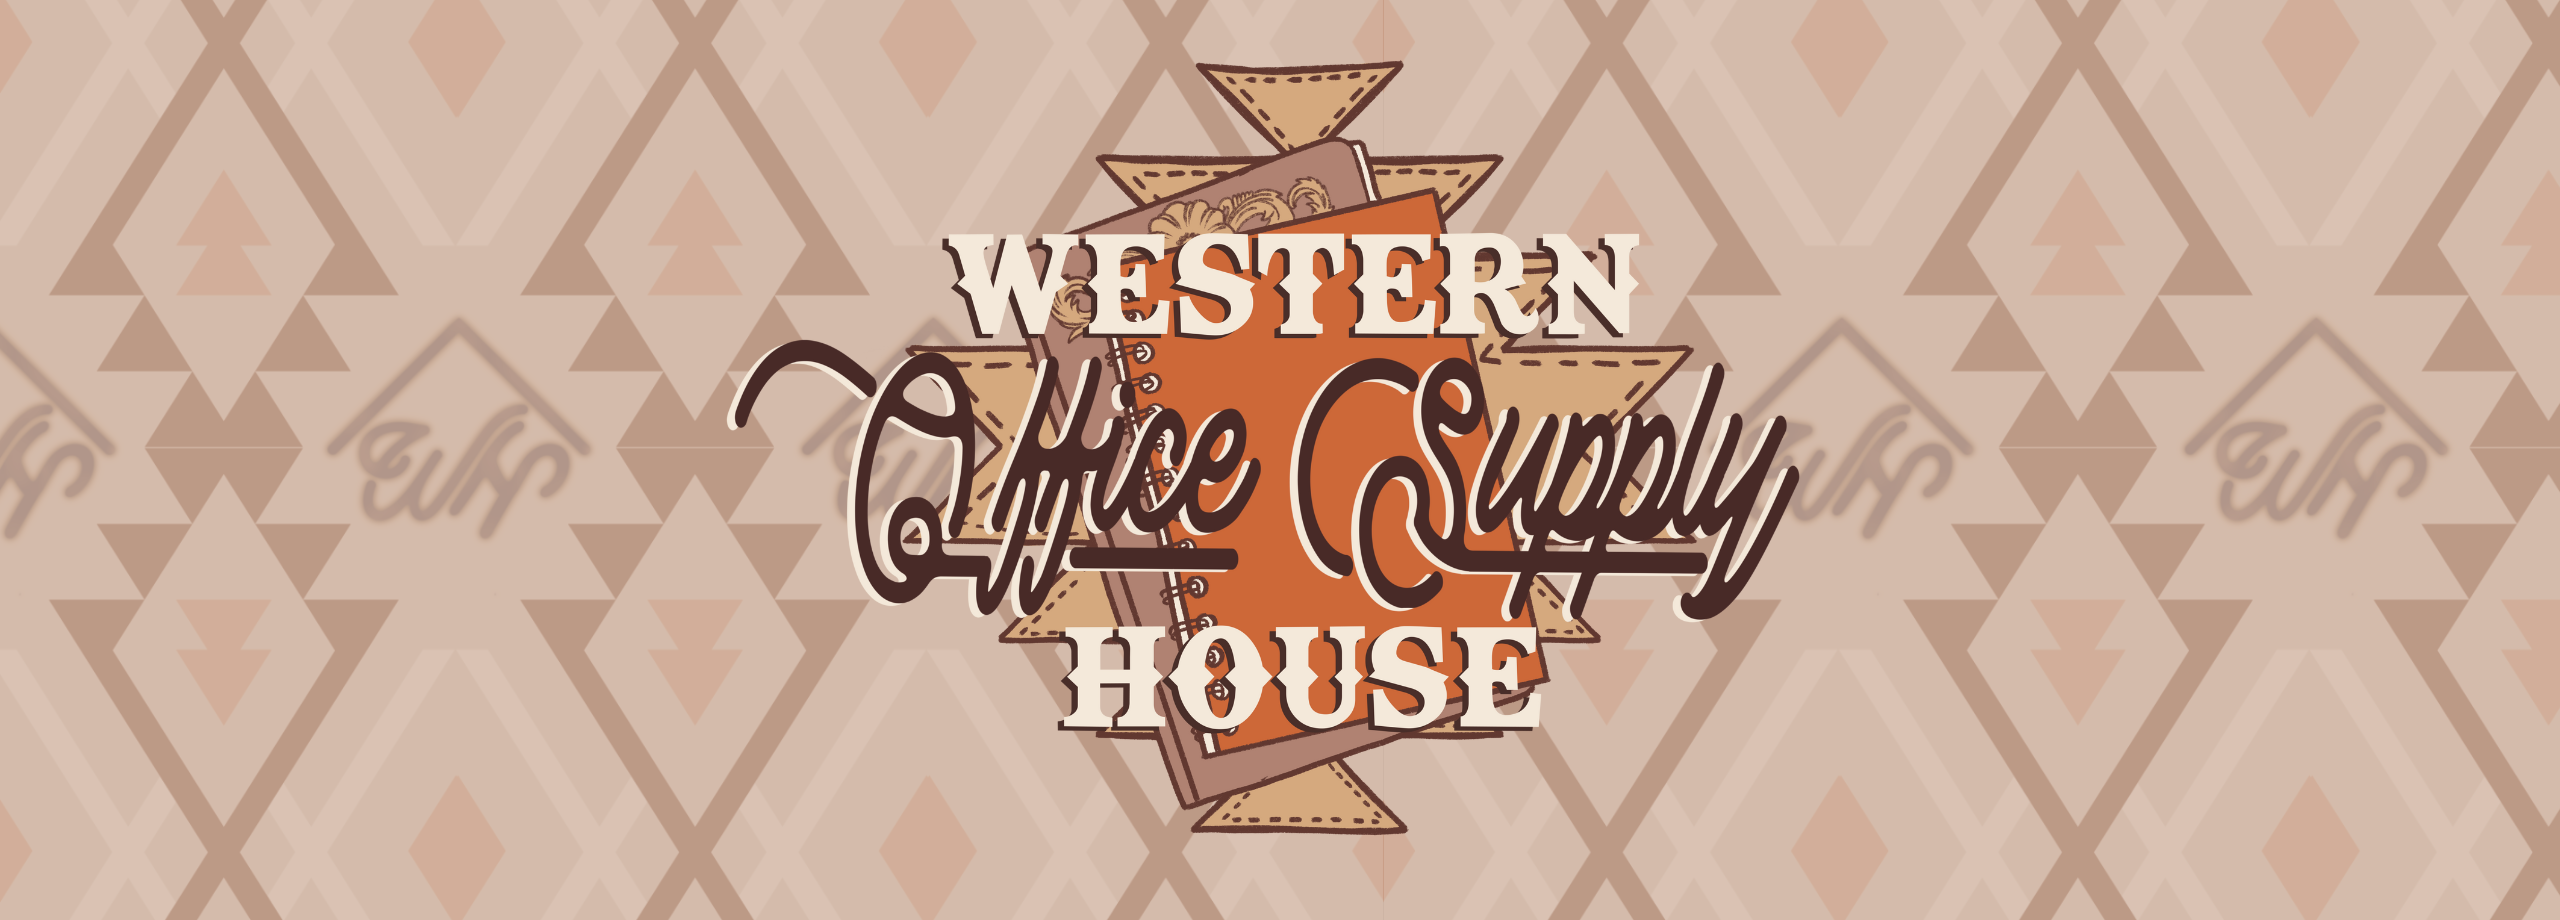 Western Office Supply House, Western Planners, Western Office, Corporate Western, Ranch Office, Ranch House, Ranch Style, Western Home, Western Style